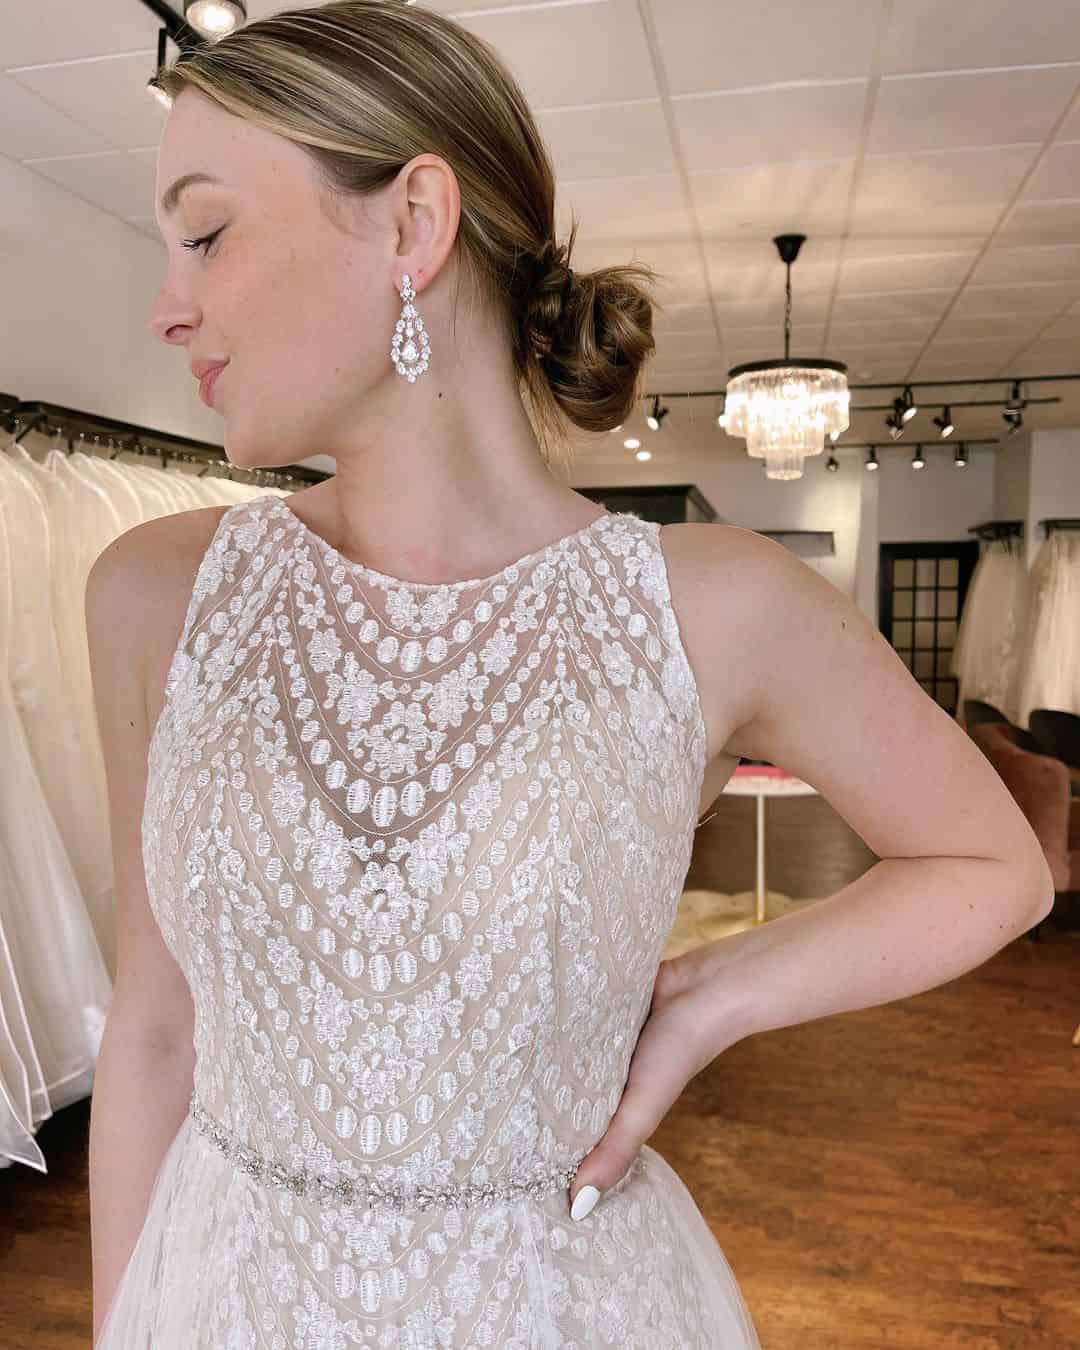 hairstyle to try on wedding dresses